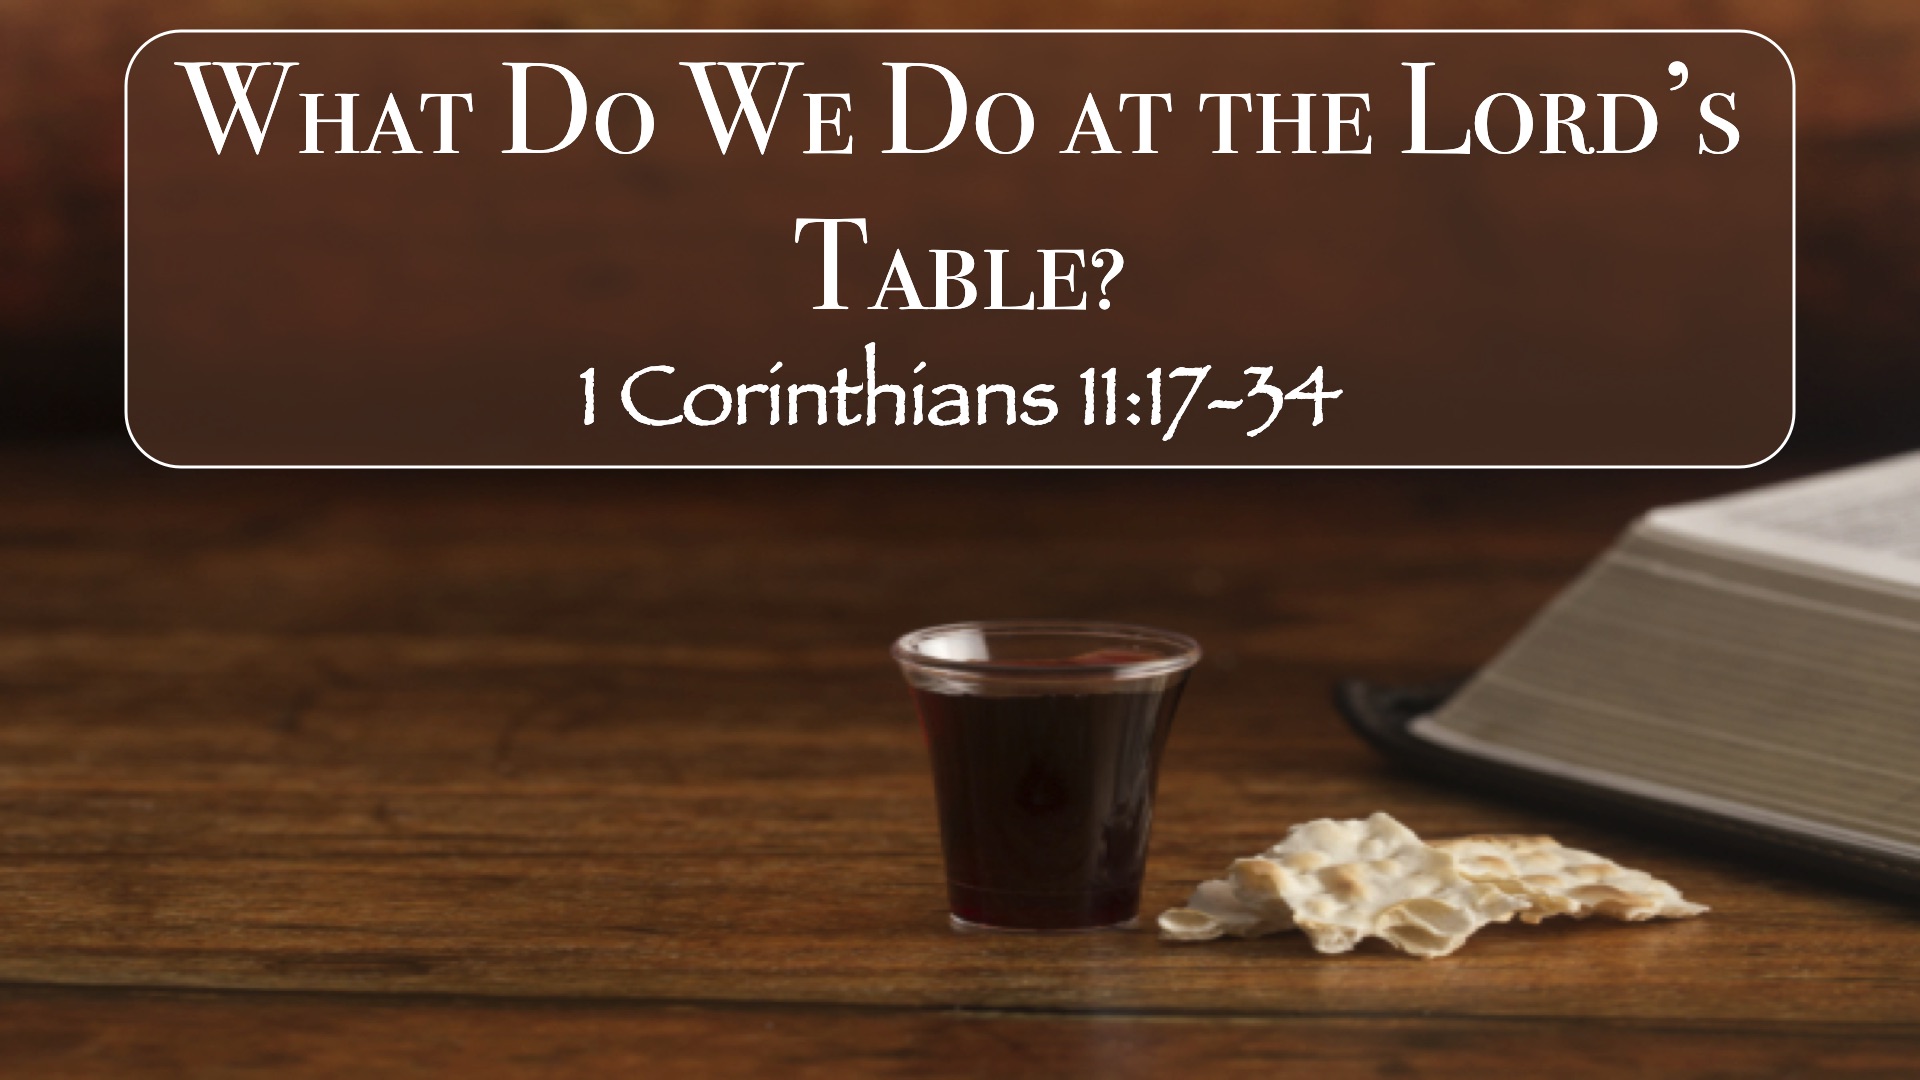 “What Do We Do at the Lord’s Table?”